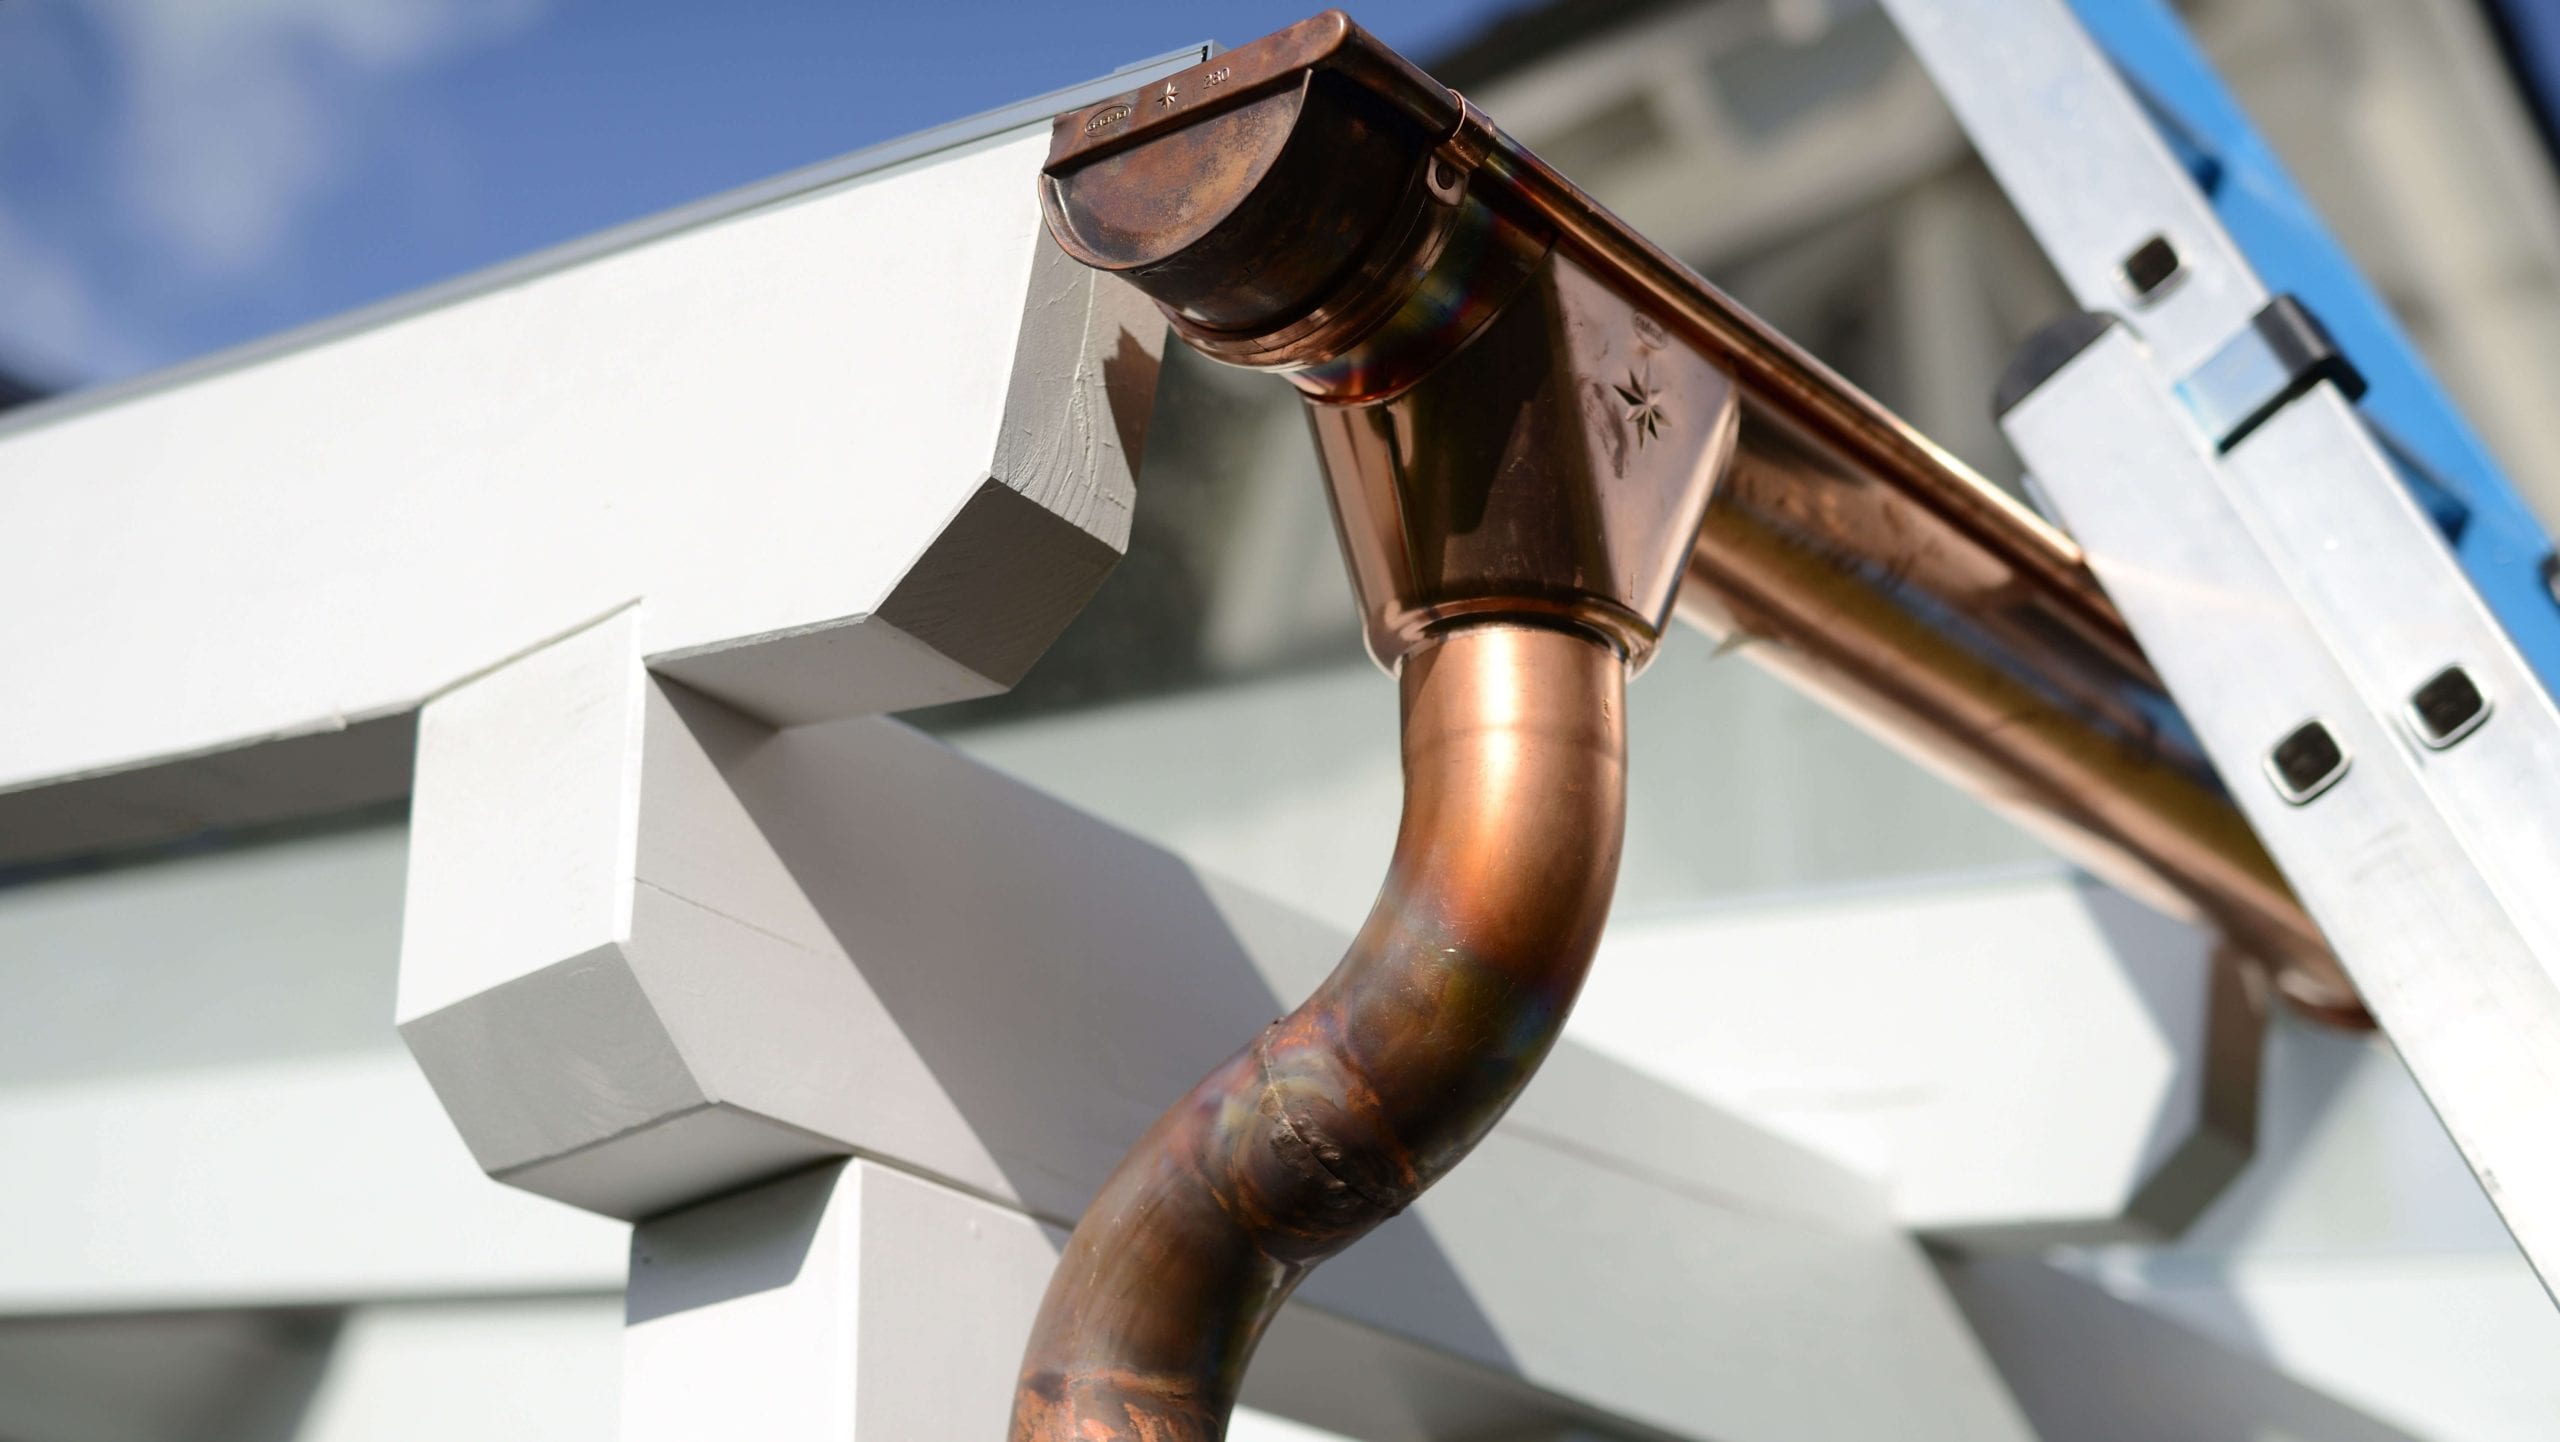 Make your property stand out with copper gutters. Contact for gutter installation in Austin